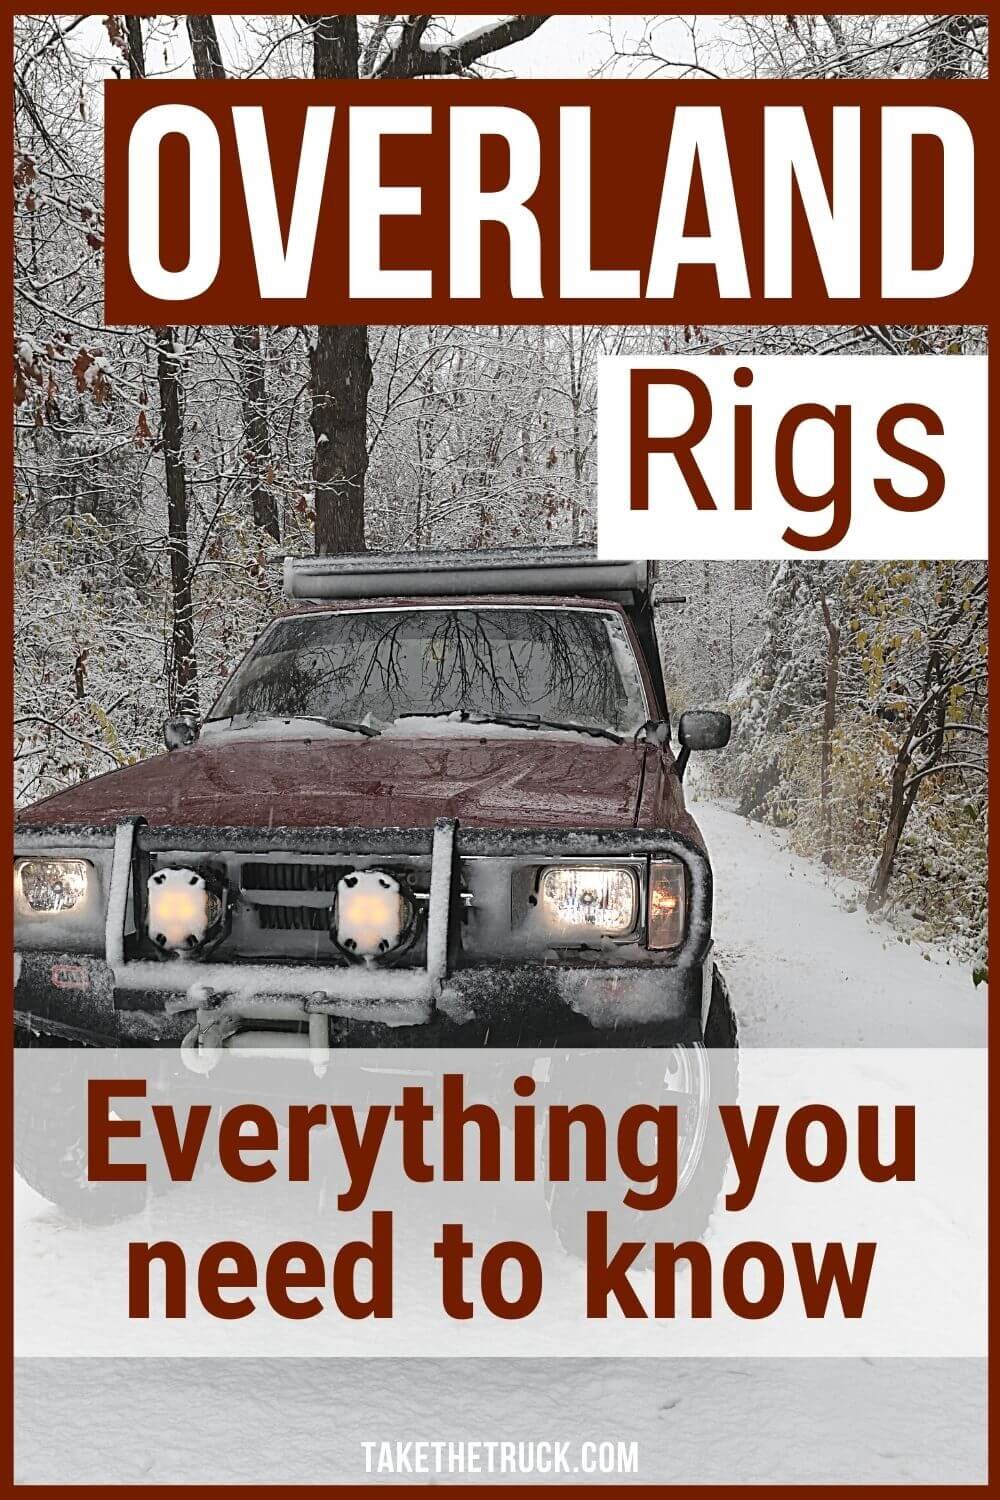 Looking for an overland vehicle? Eight different considerations are outlined, as are pros &amp; cons to different overlanding rigs - this guide can help you find the perfect overland truck or SUV. 